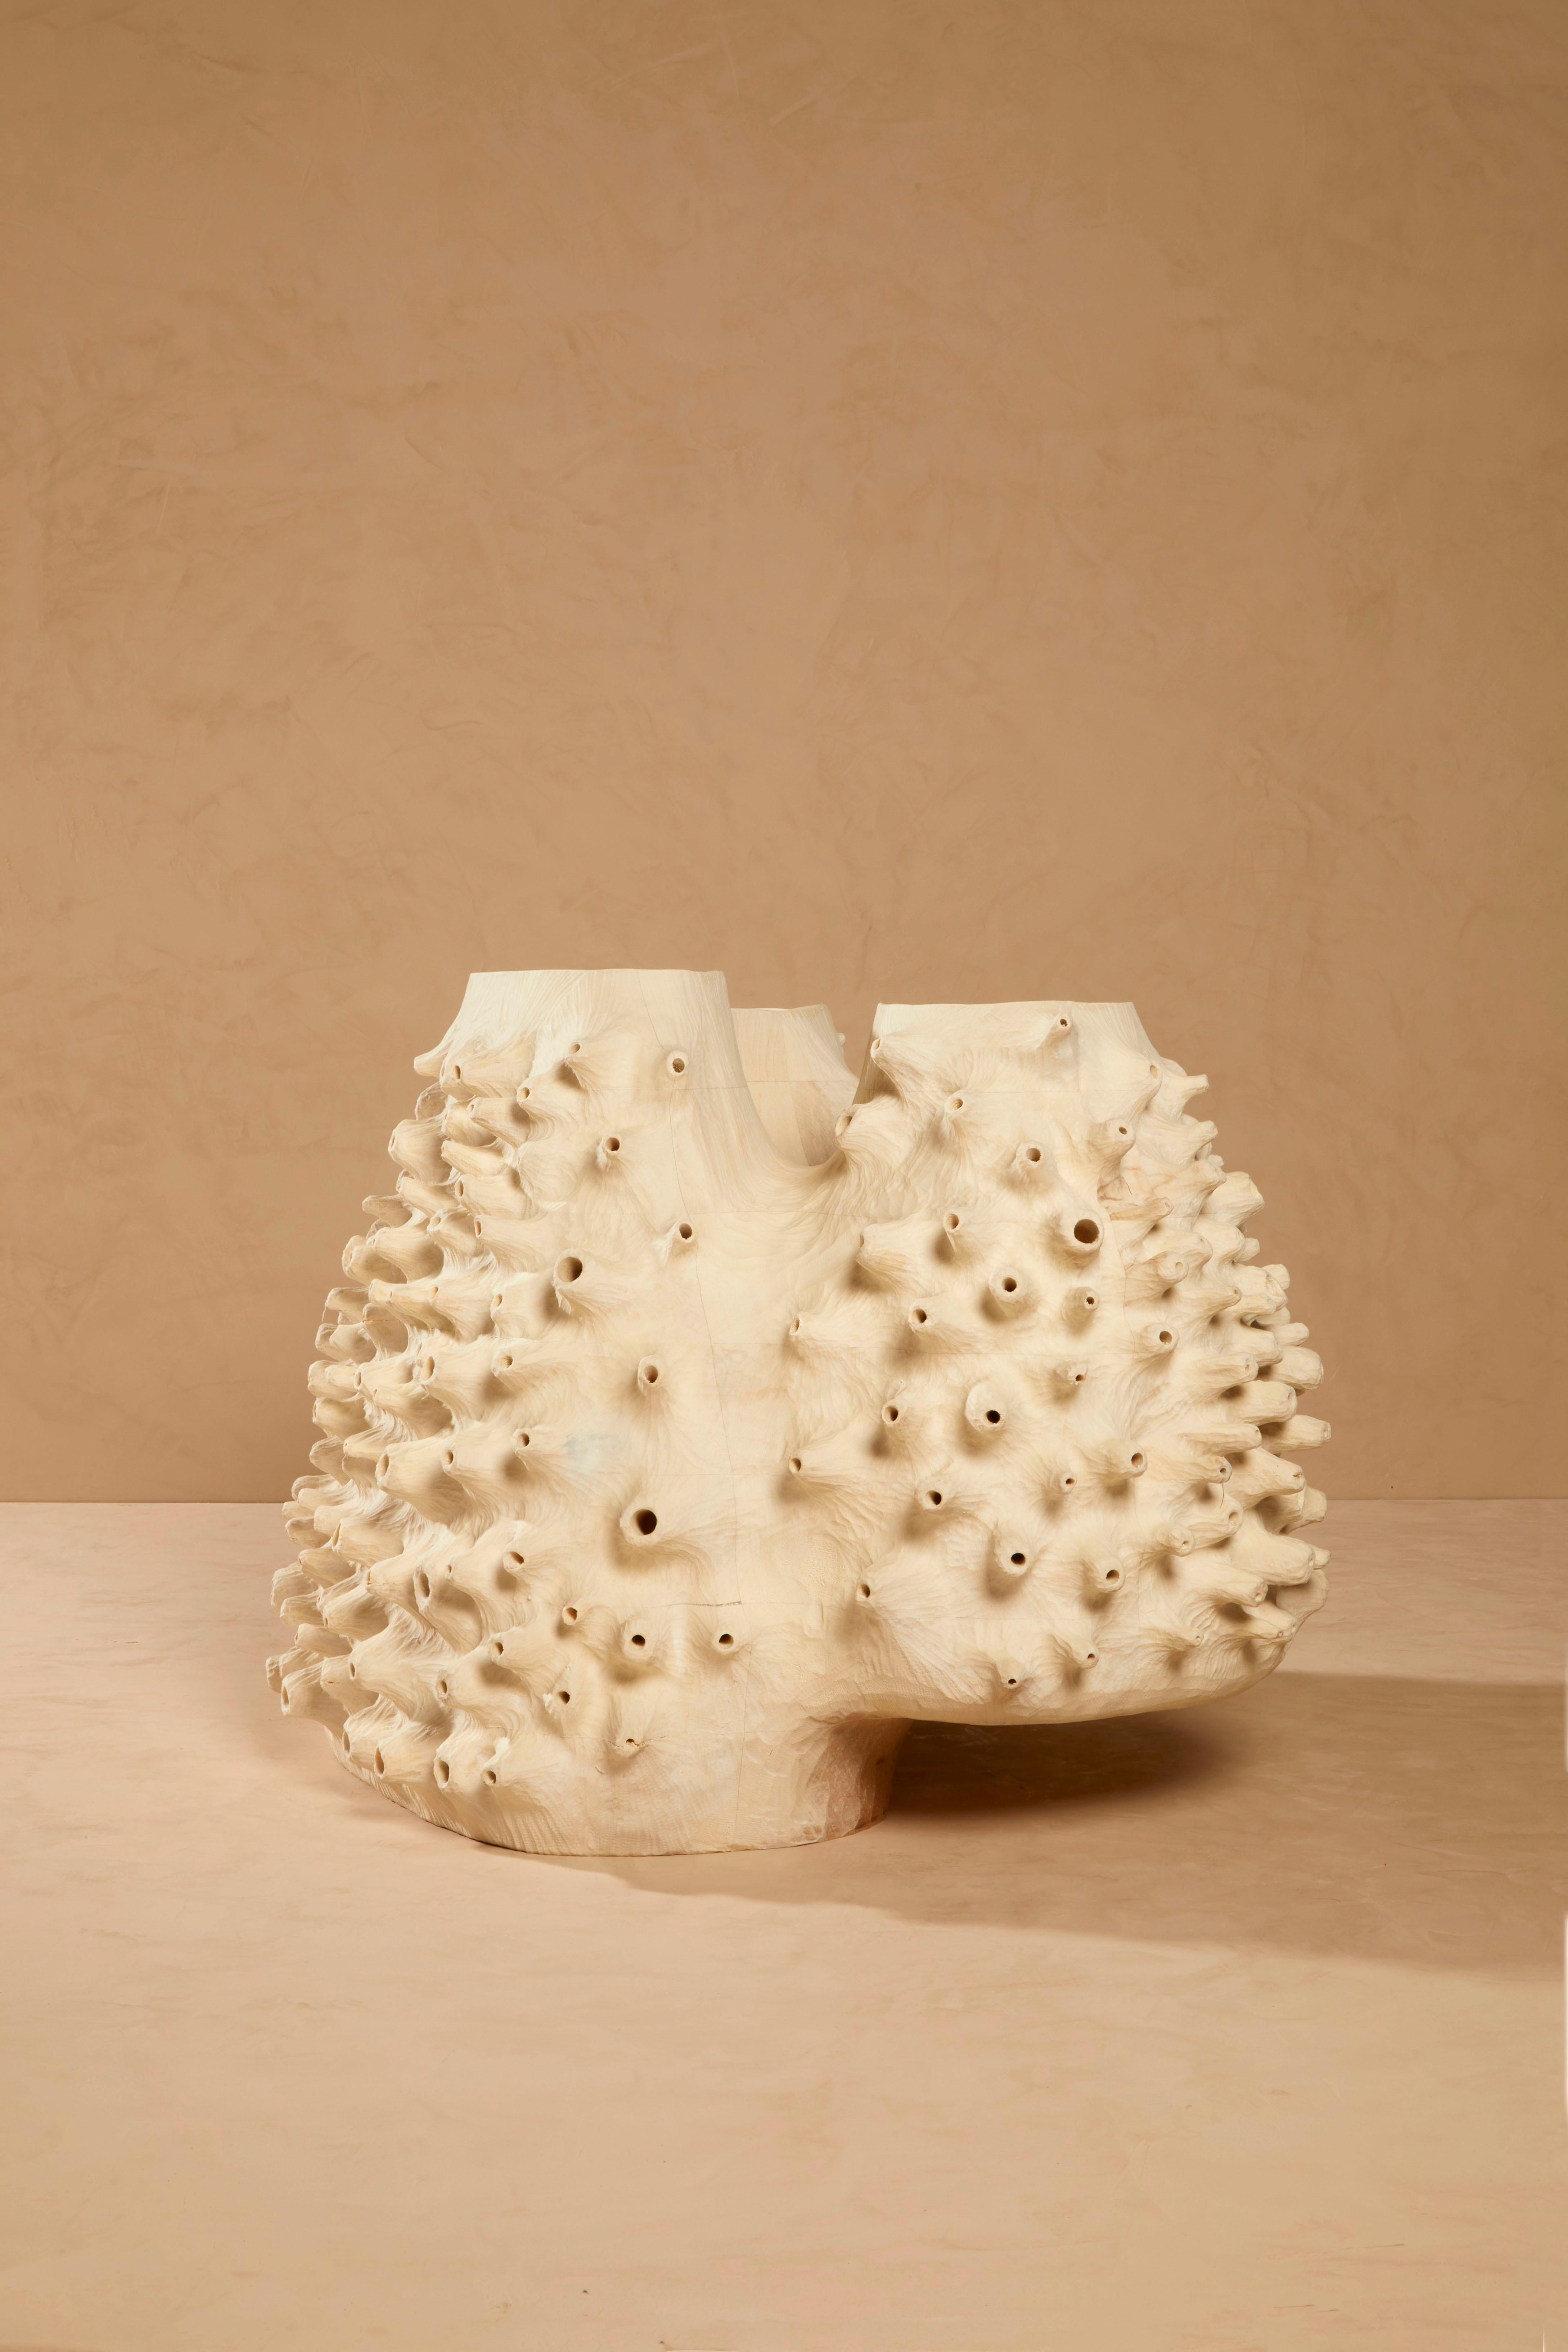 Nikitaki vase by Atelier Carlès Demarquet
Dimensions: 70 x 50 x 45 cm
Materials: Solid maple and waxed finish.


It is like a vestige in the creeks. Like a mystery without surprise, an undatable artefact, past or future, but whose intimate